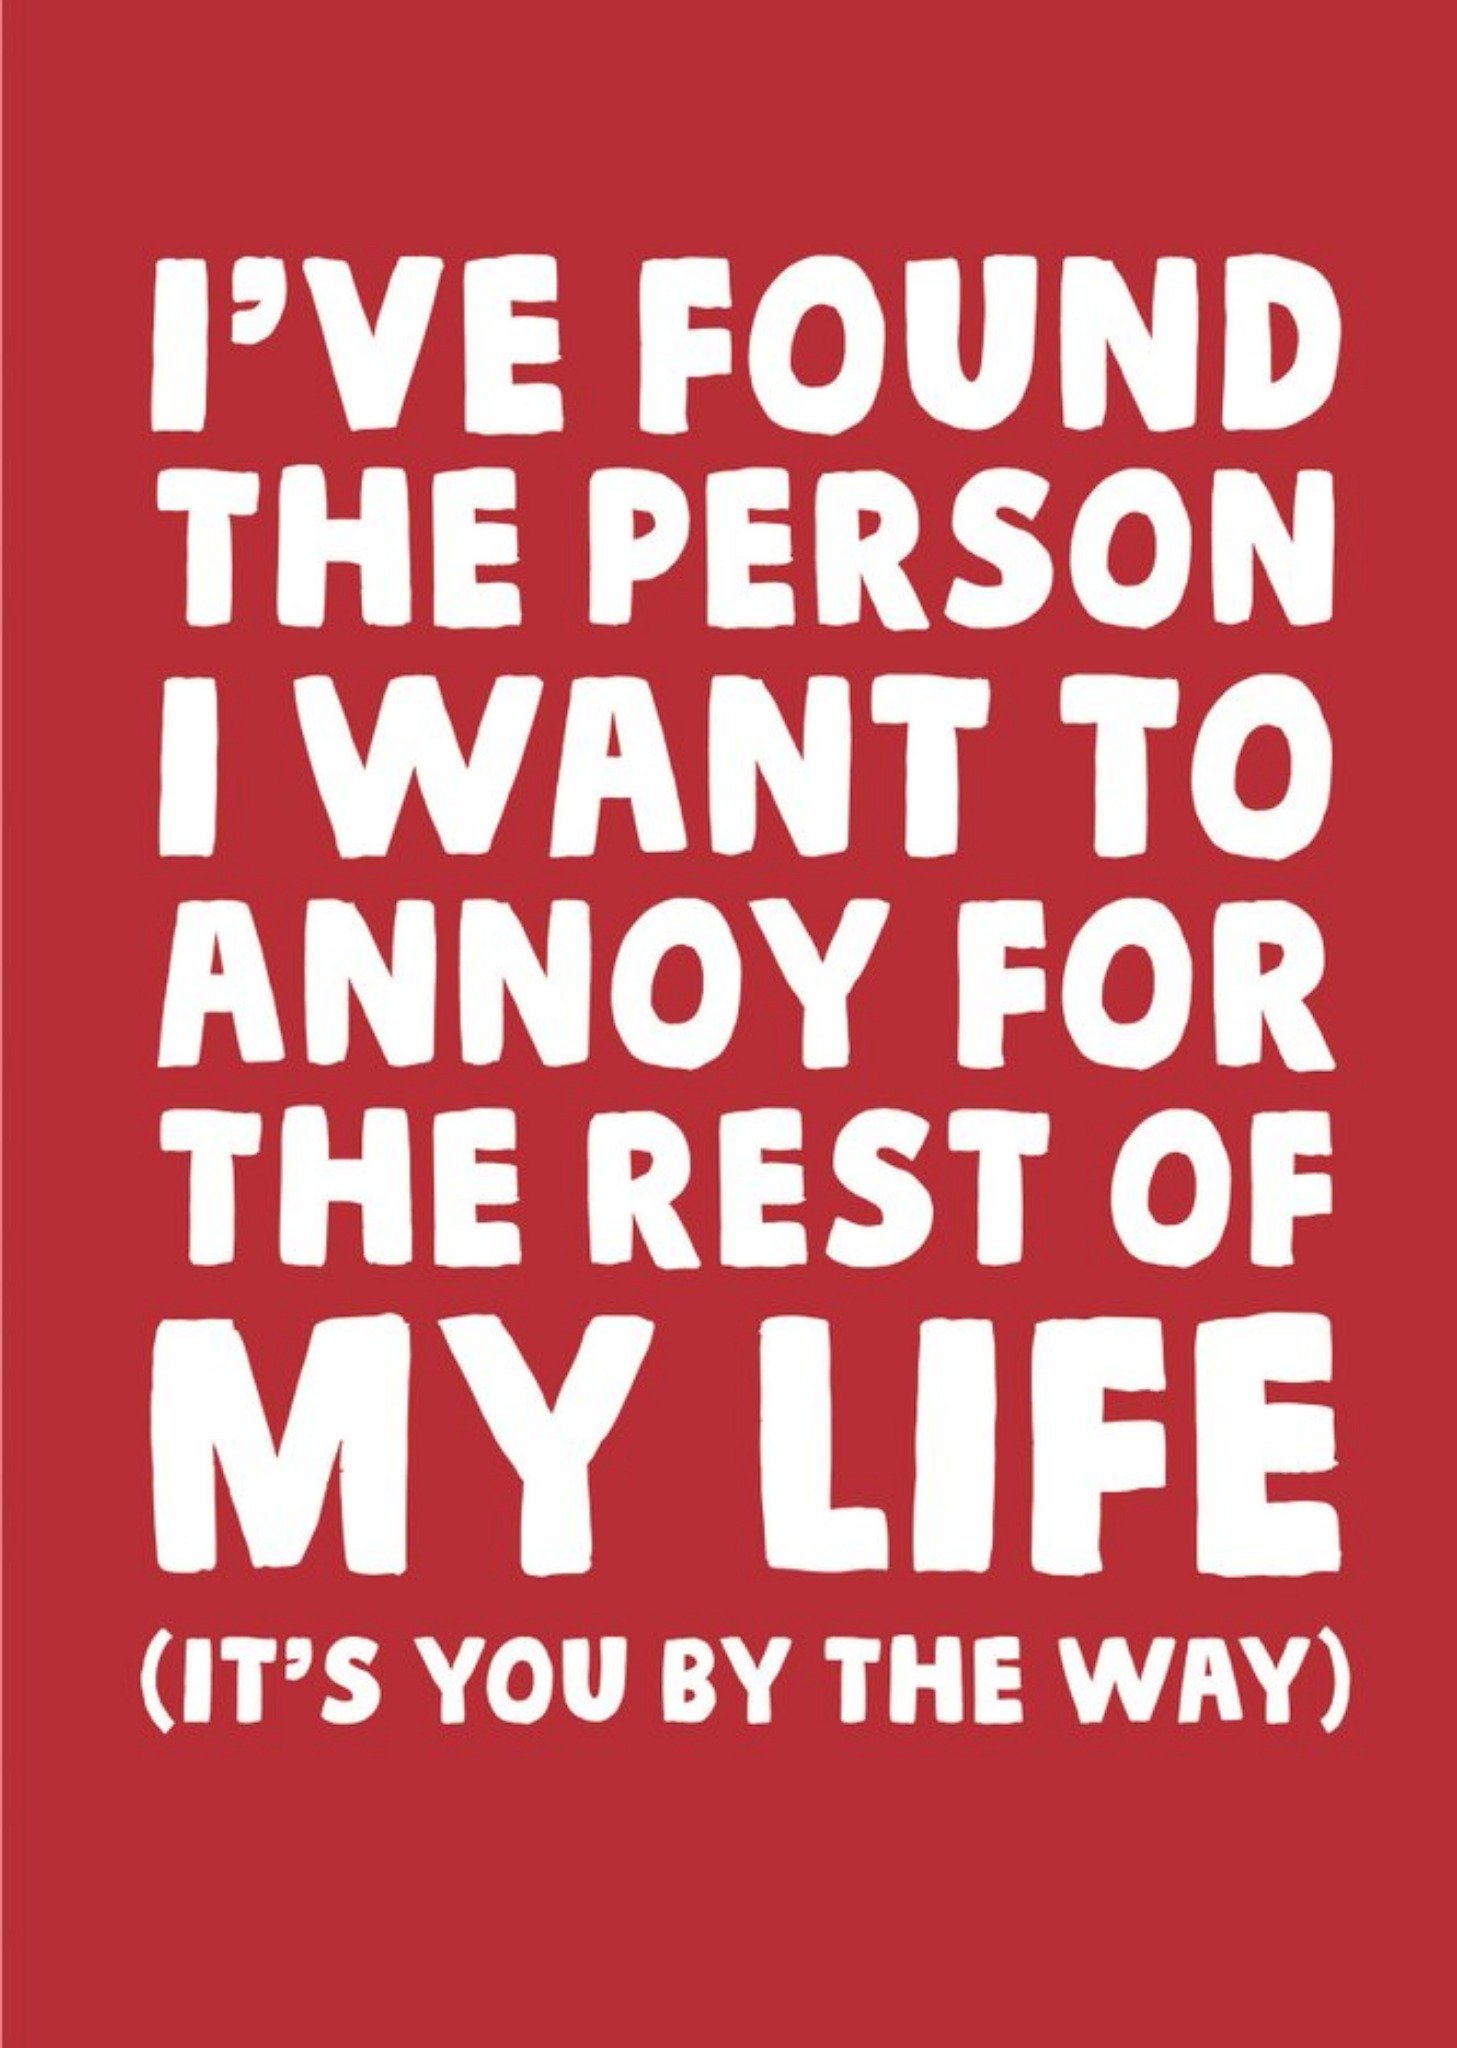 Moonpig Funny The Person I Want To Annoy For The Rest Of My Life Card Ecard